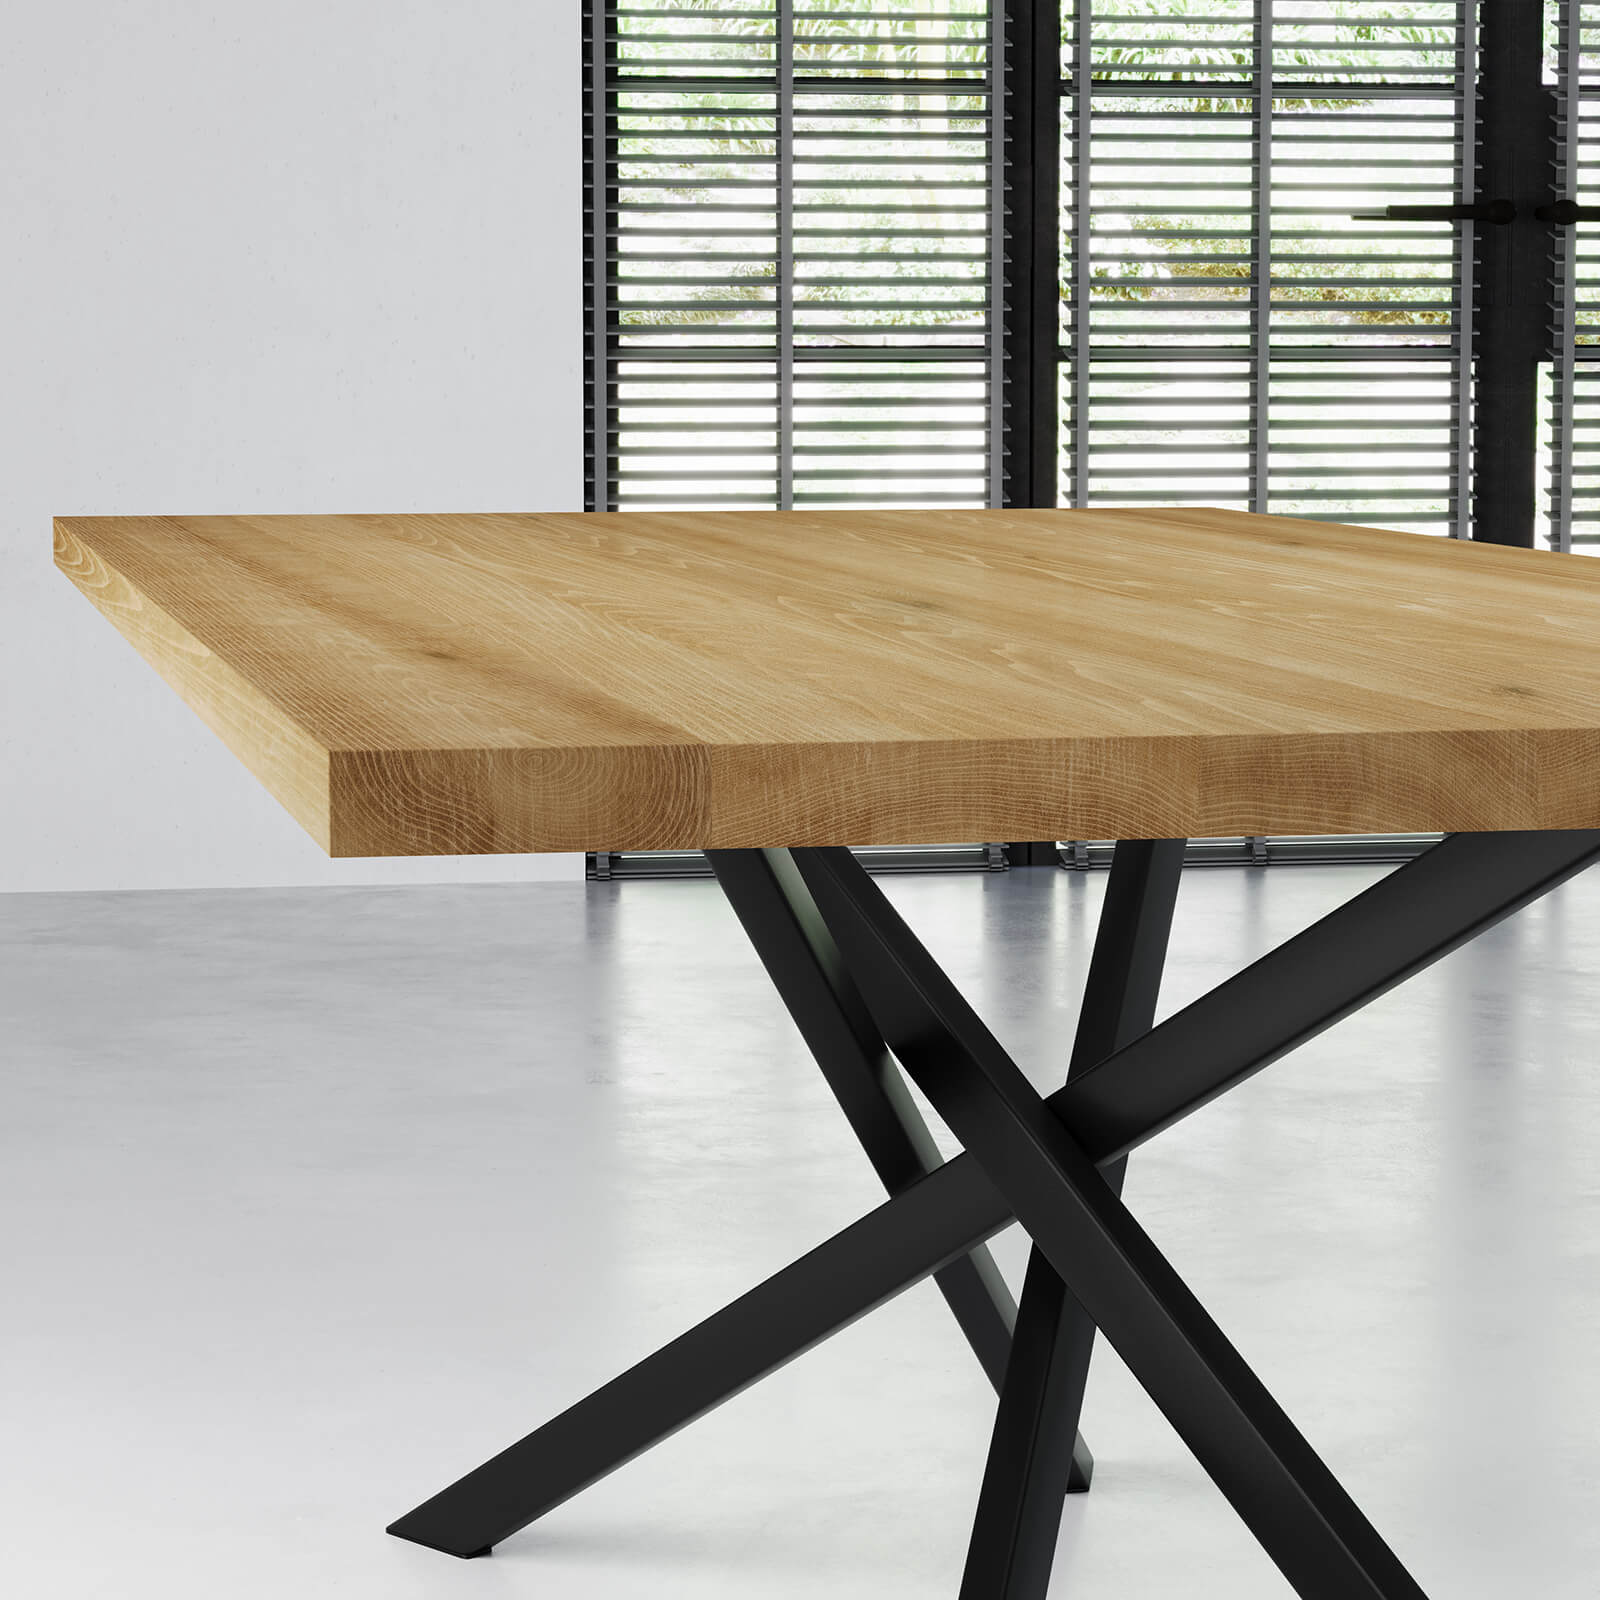 Light Brown Table Close-Up 3D Rendering